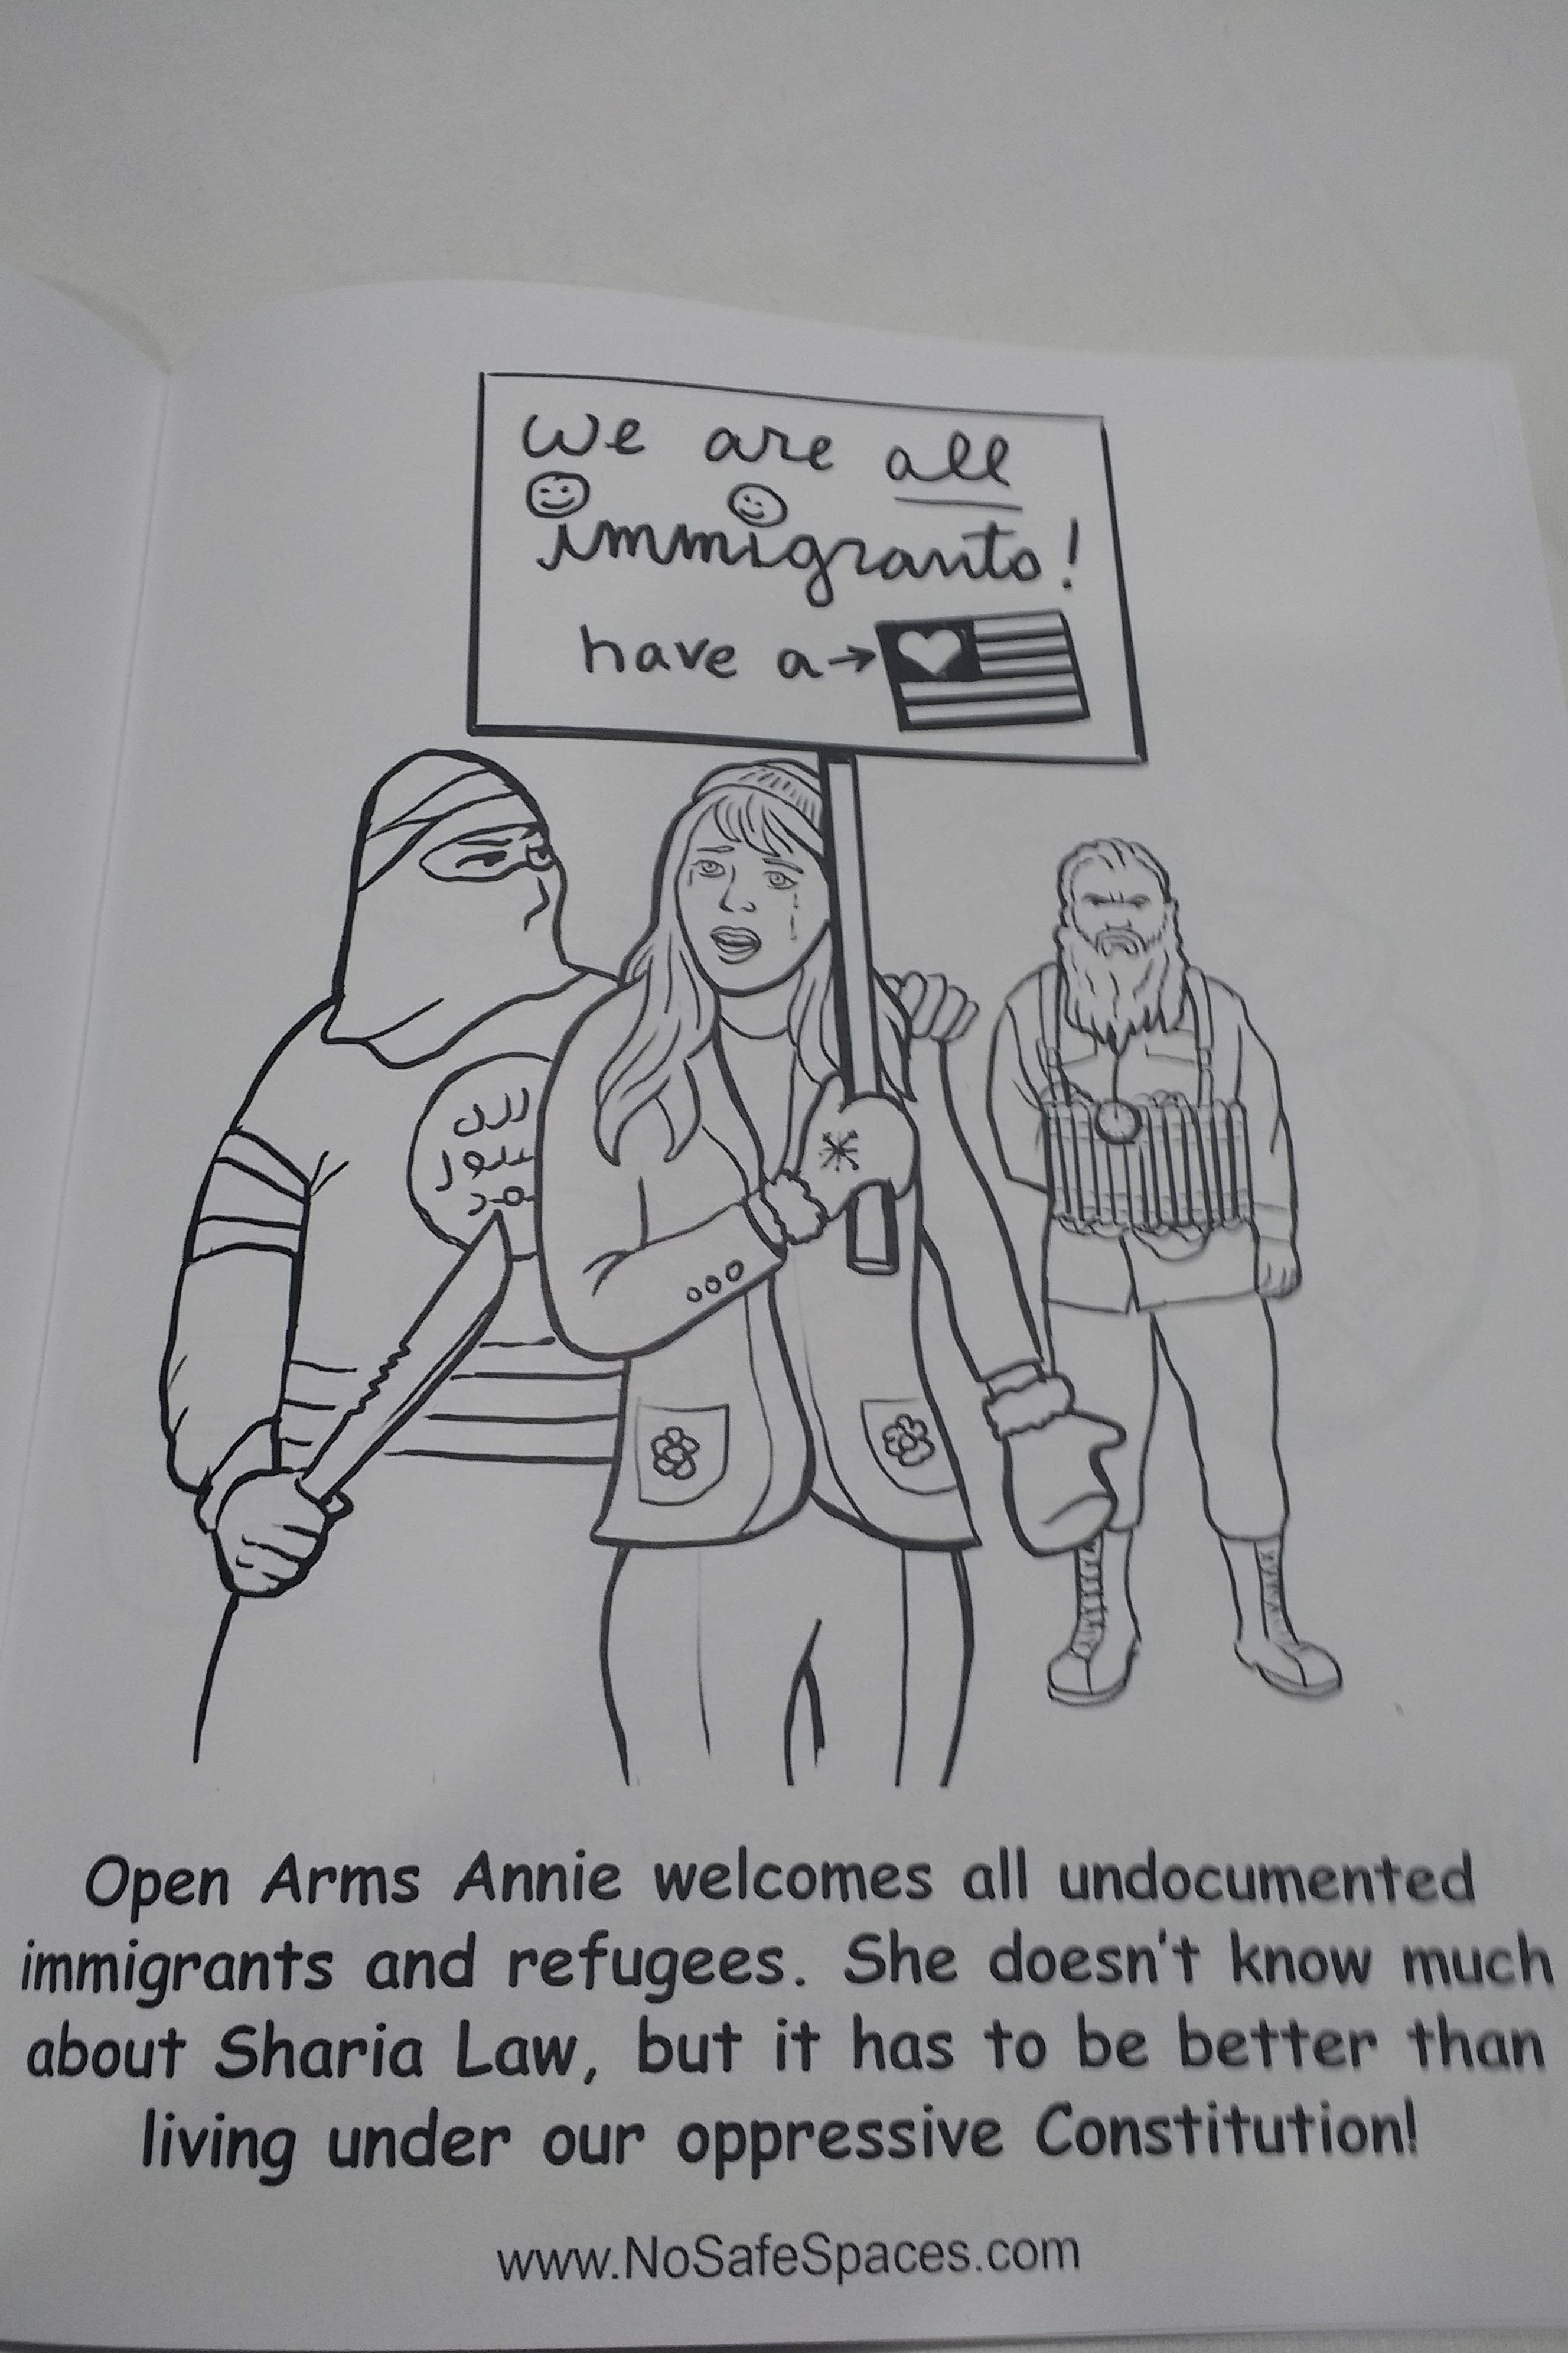 Image from "Safe Spaces" coloring book.